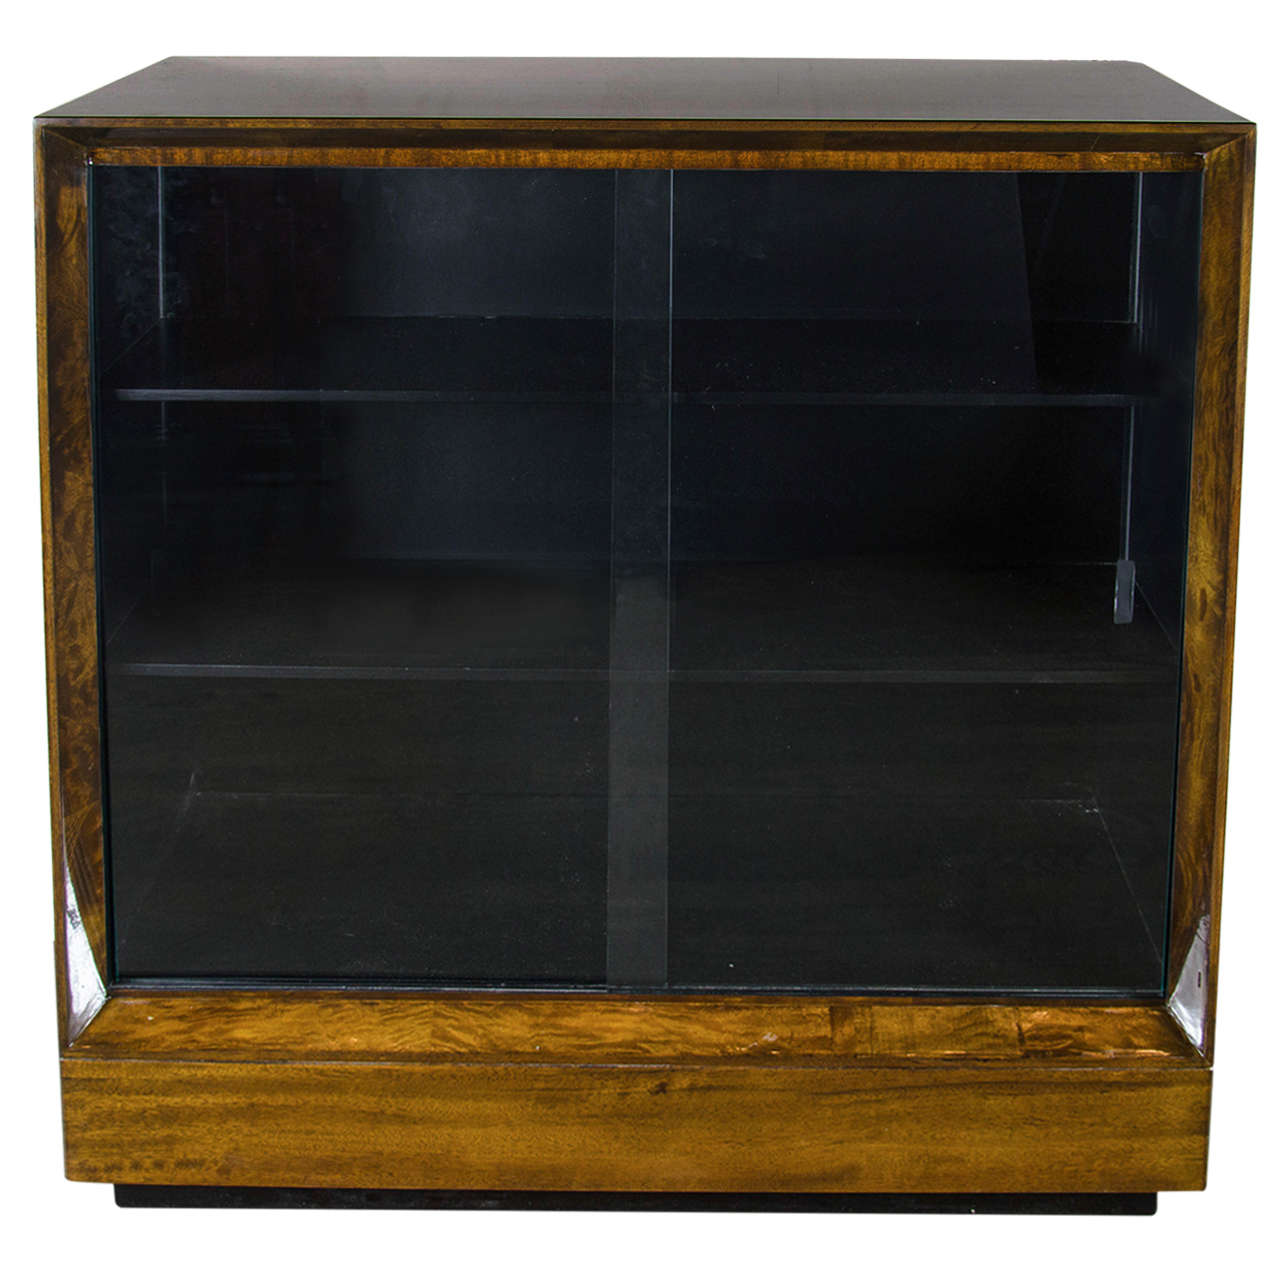 Exceptional Art Deco Bookcase by Gilbert Rohde in Book-Matched Paldao Wood